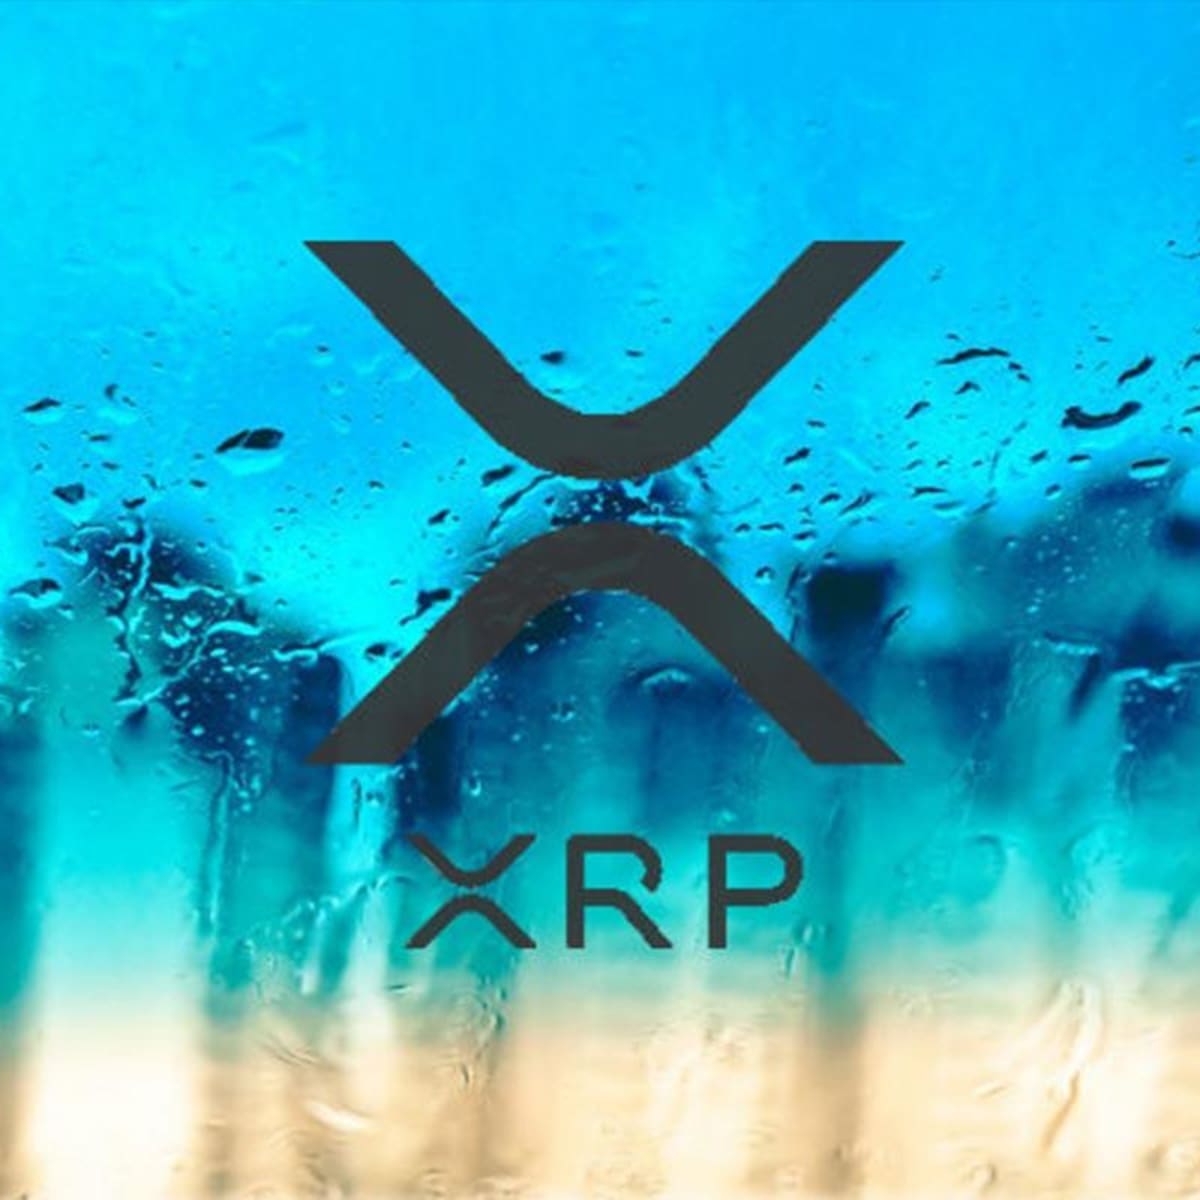 How To Buy Ripple Xrp Cryptocurrency / How To Buy Ripple Xrp On Kraken Cryptoticker : For more information, see our verification levels documentation.